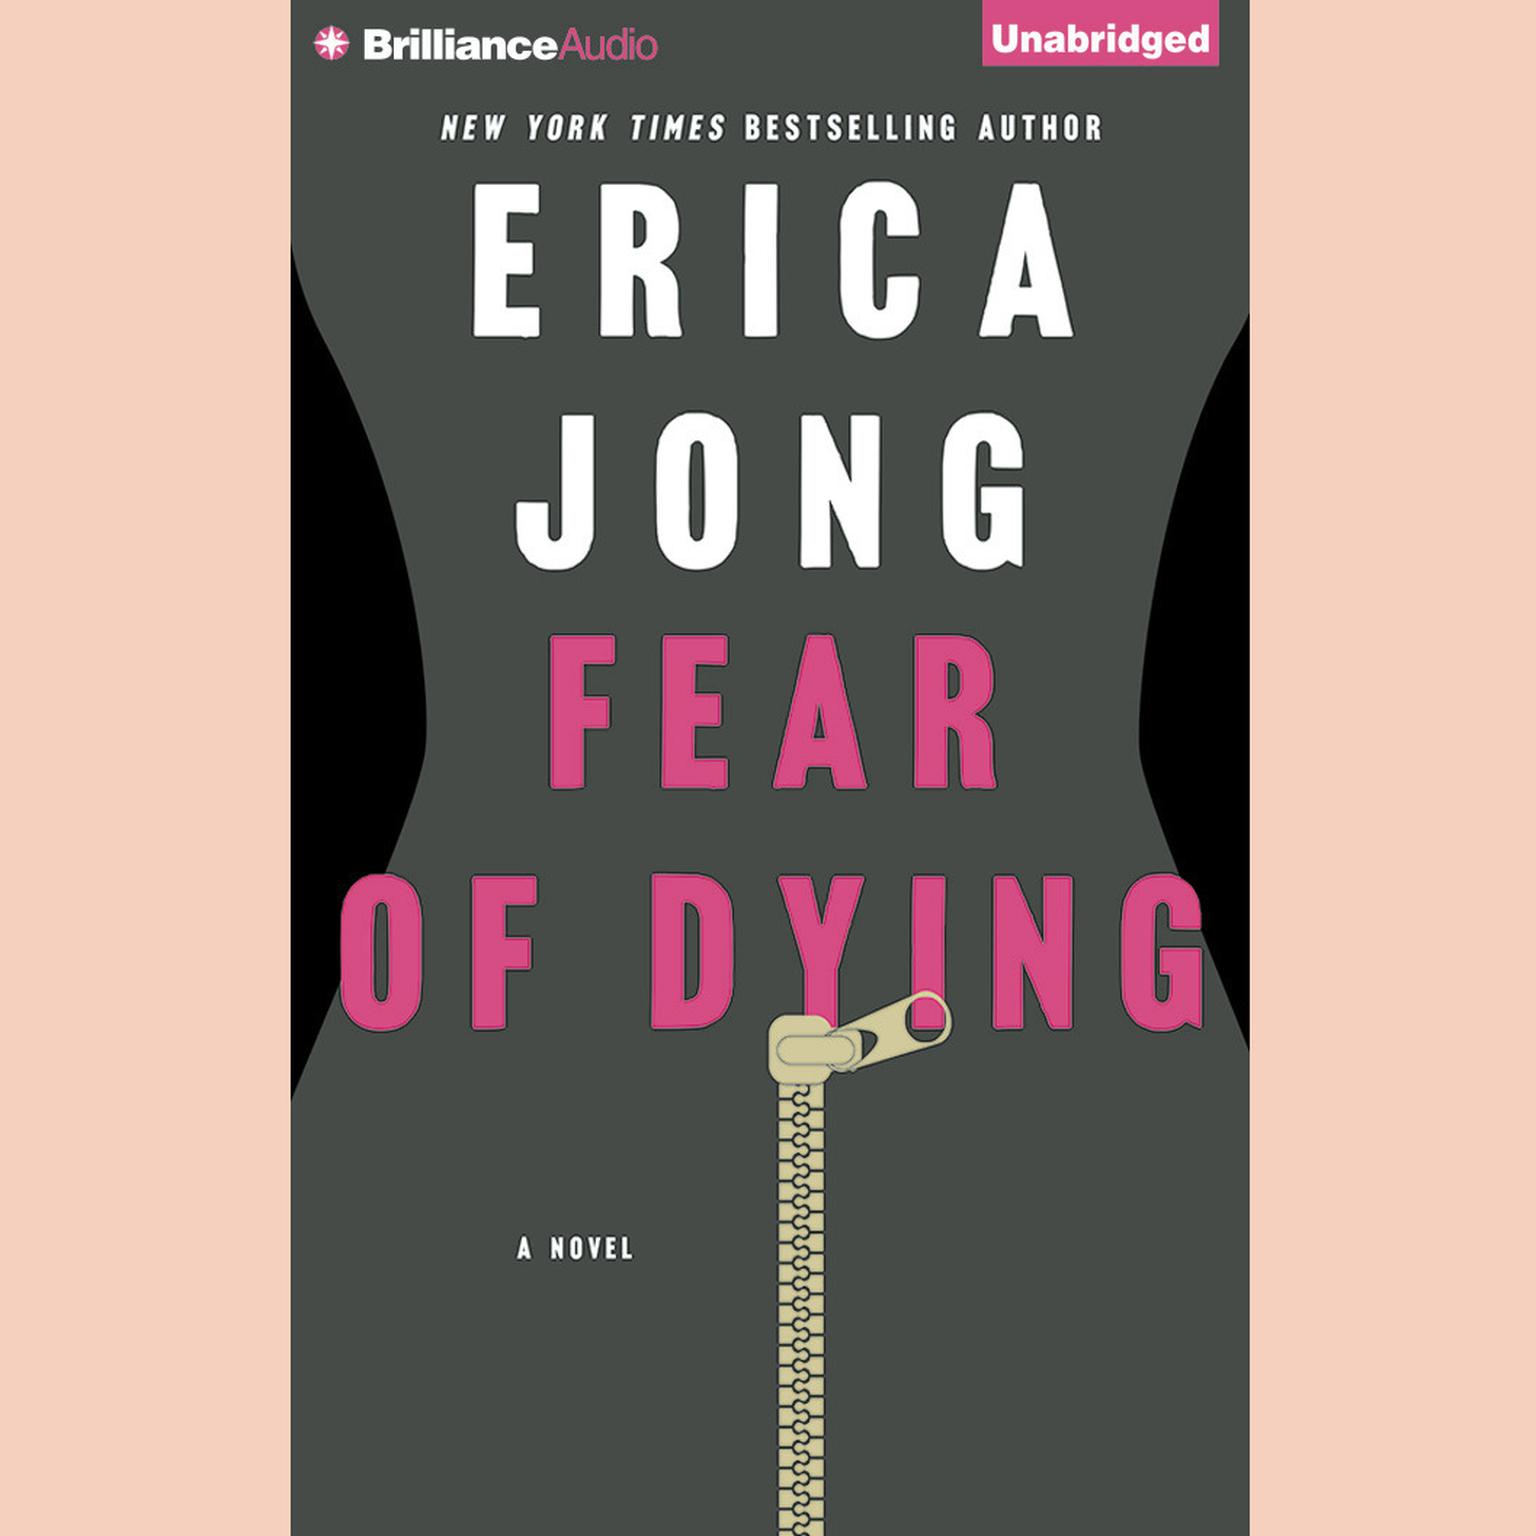 Fear of Dying Audiobook, by Erica Jong